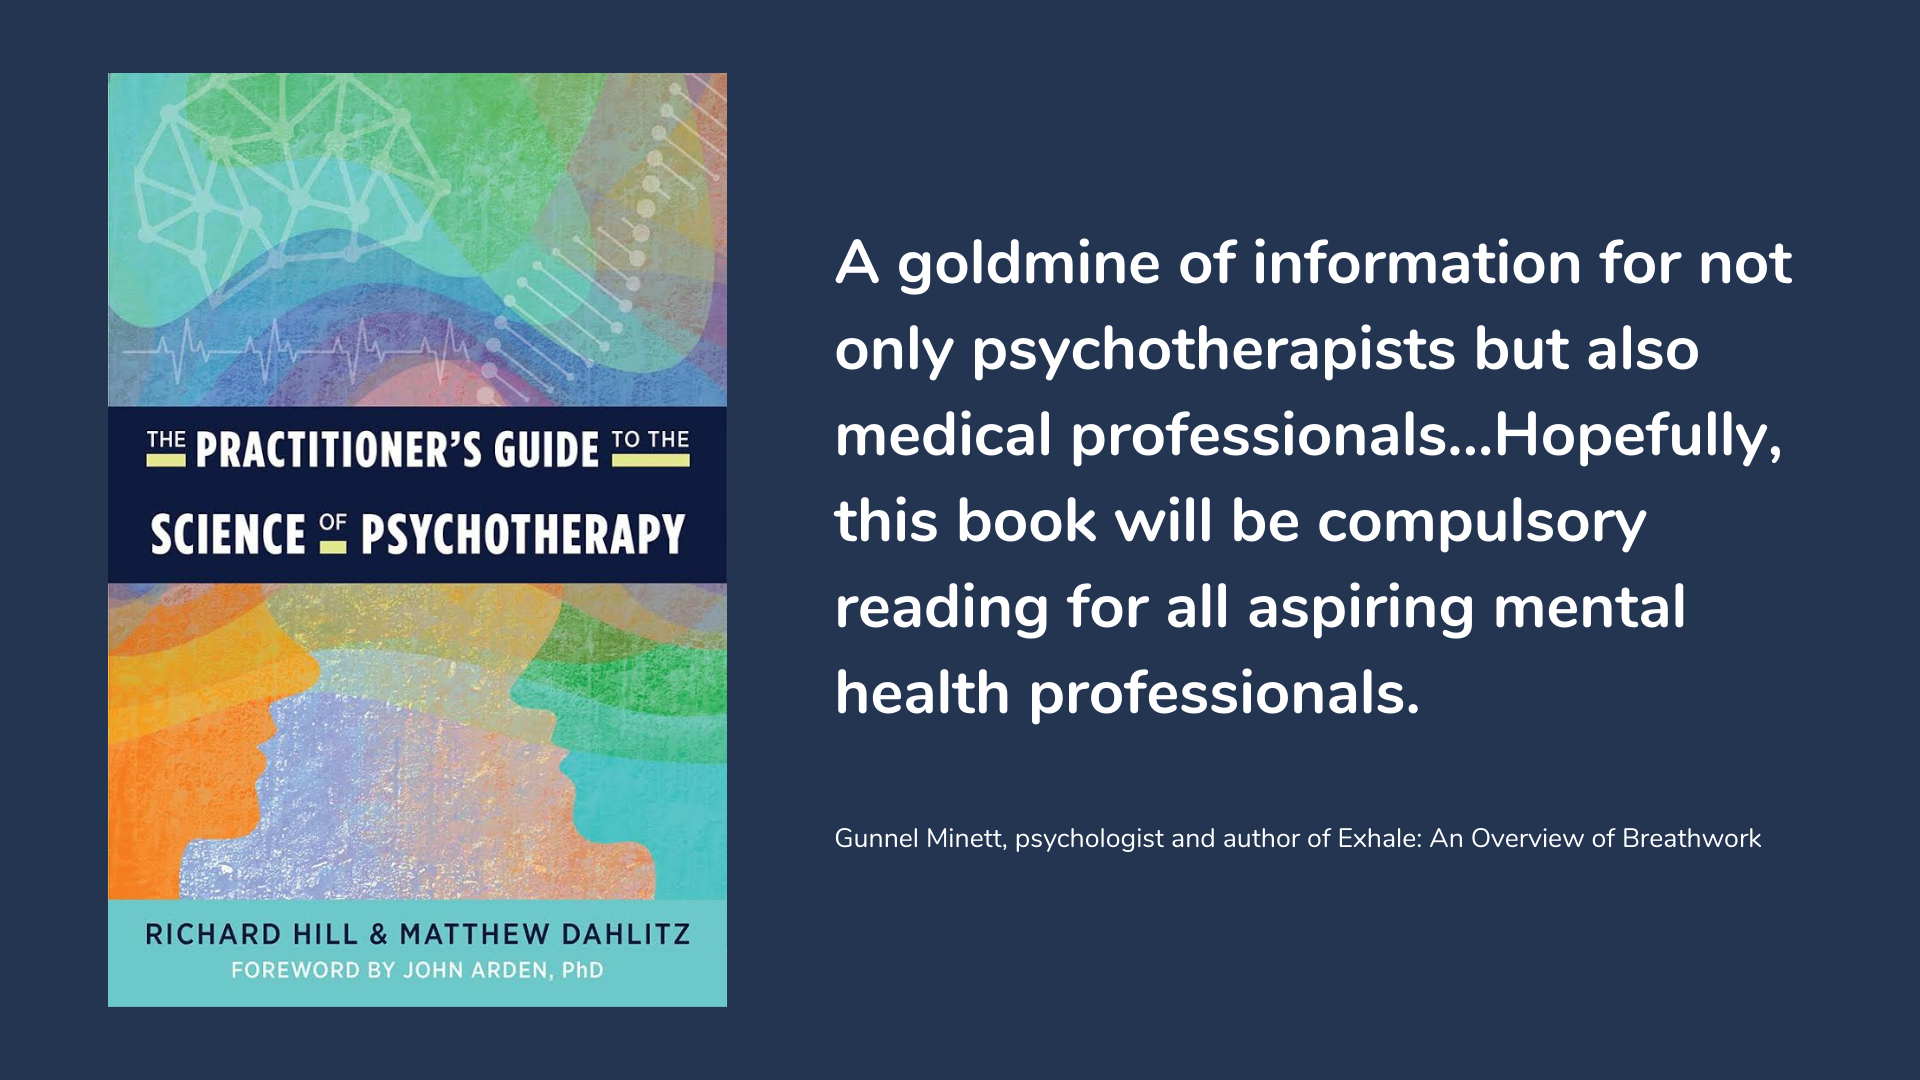 The Practitioner's Guide to the Science of Psychotherapy, book cover and description.